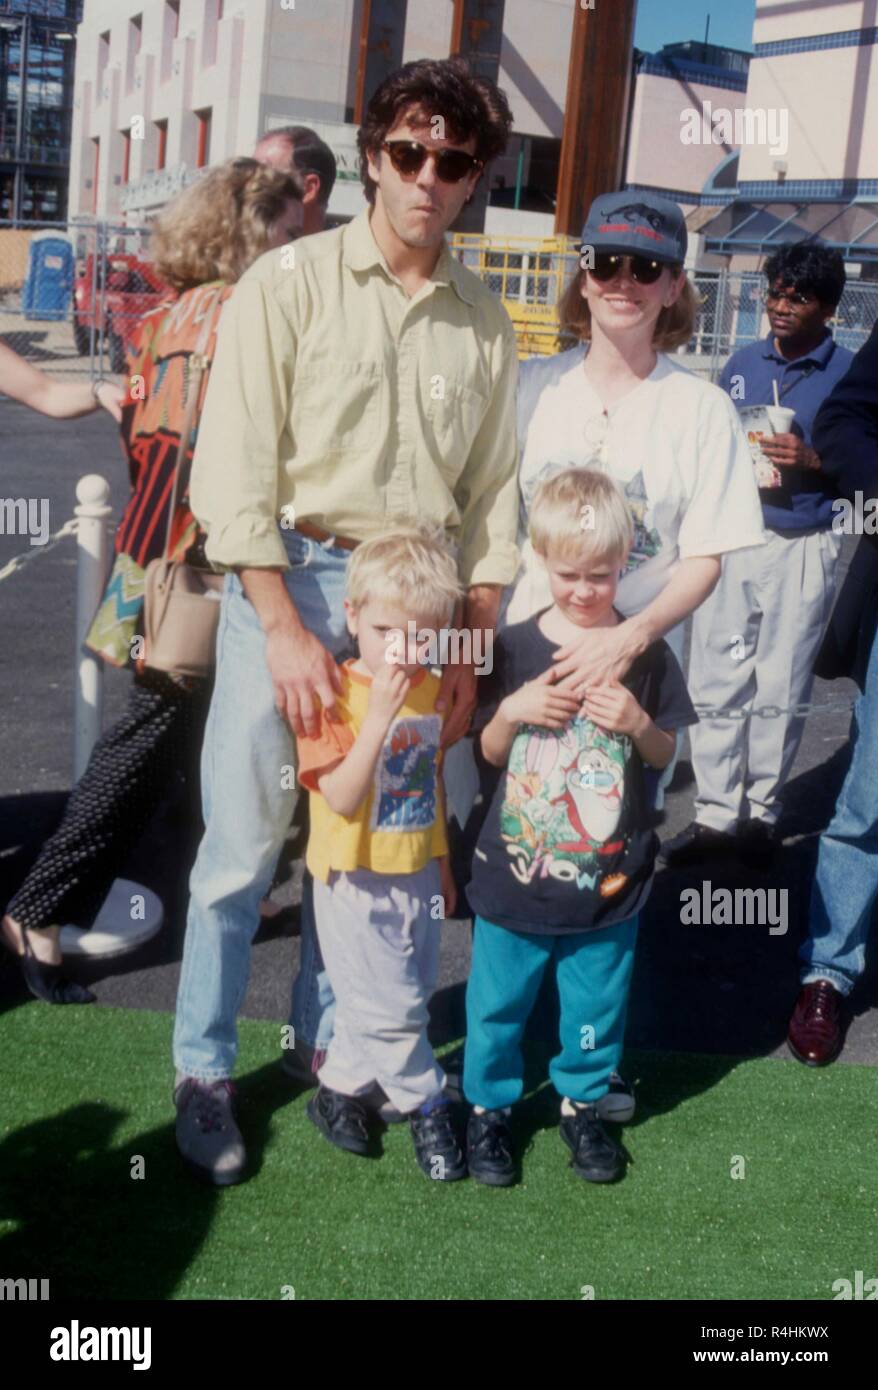 https://c8.alamy.com/comp/R4HKWX/universal-city-ca-march-6-actor-scott-valentine-and-son-trevin-john-valentine-and-guests-attend-teenage-mutant-ninja-turtles-iii-premiere-on-march-6-1993-at-cineplex-odeon-cinema-in-universal-city-california-photo-by-barry-kingalamy-stock-photo-R4HKWX.jpg